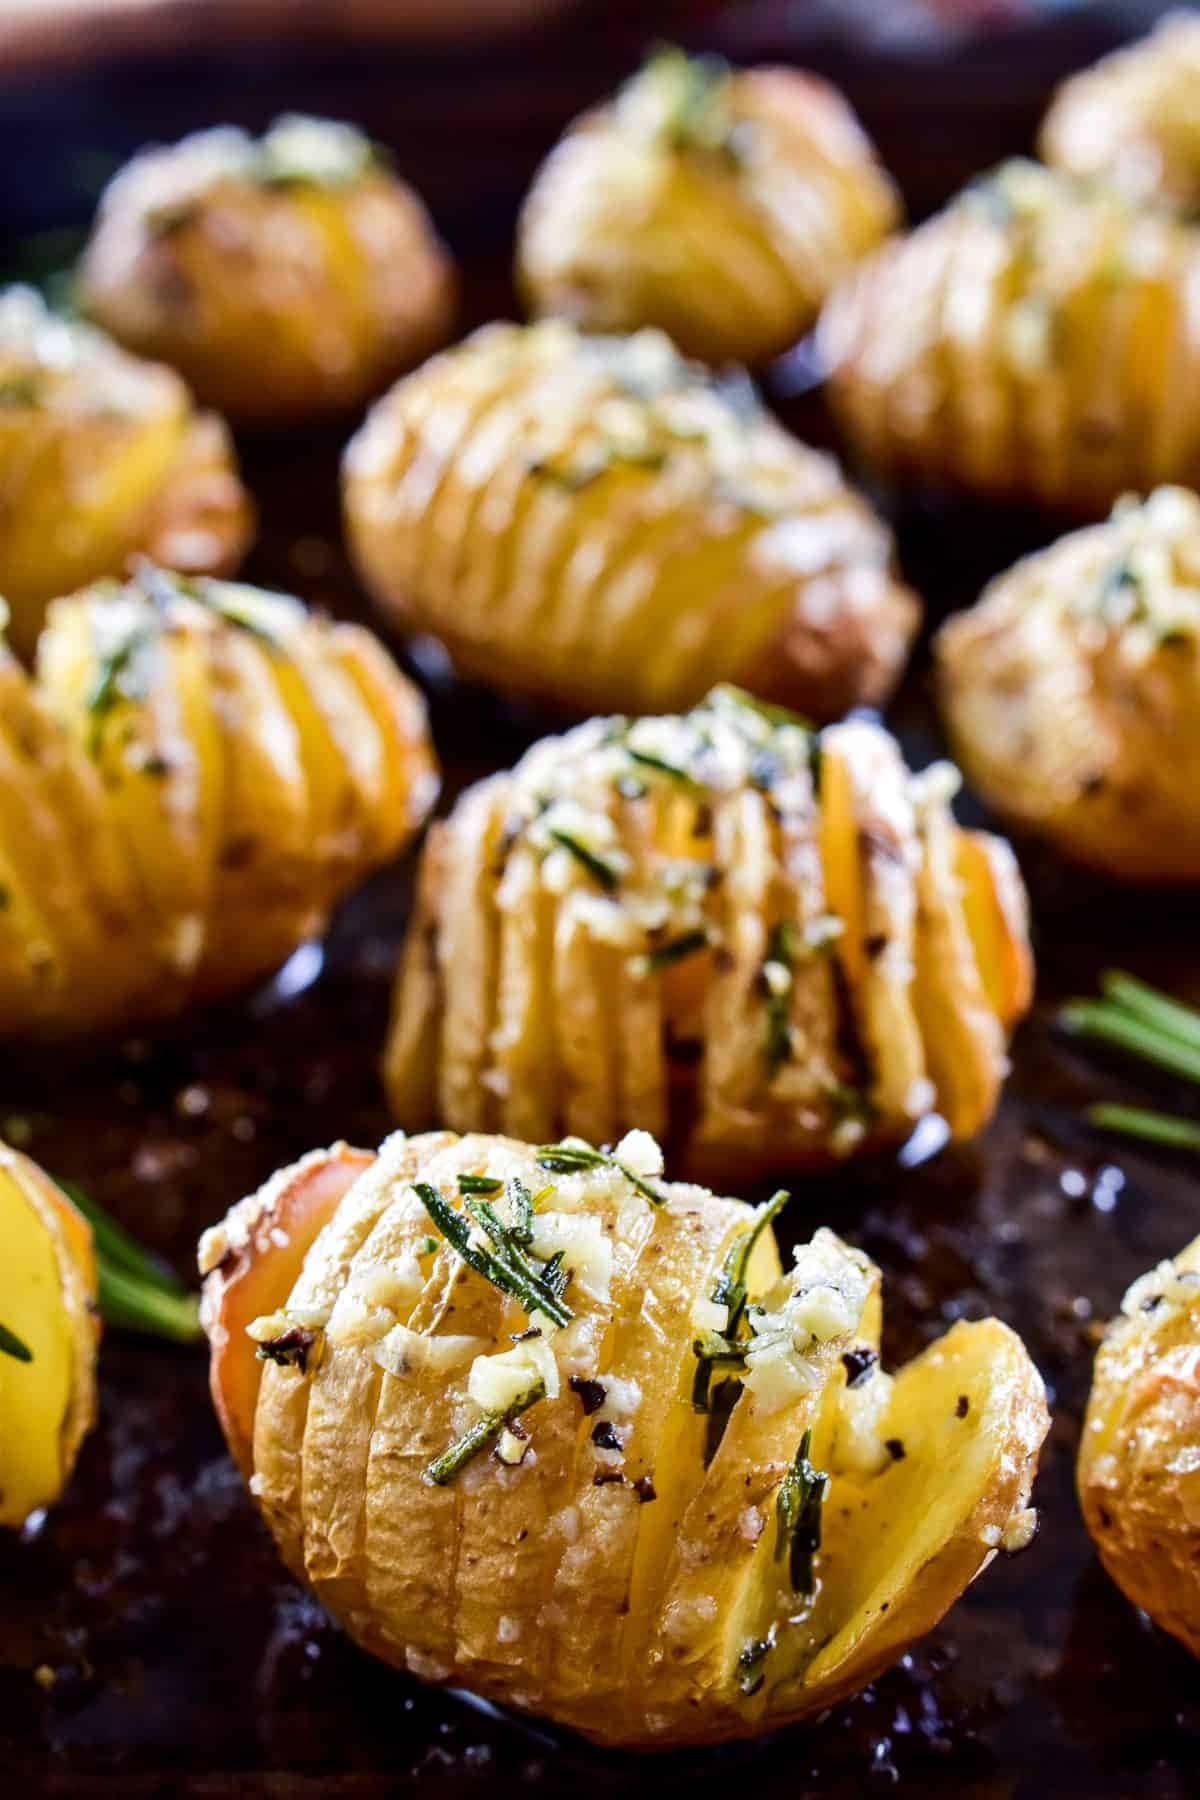 Roasted potatoes with garlic, herbs and sauce. 